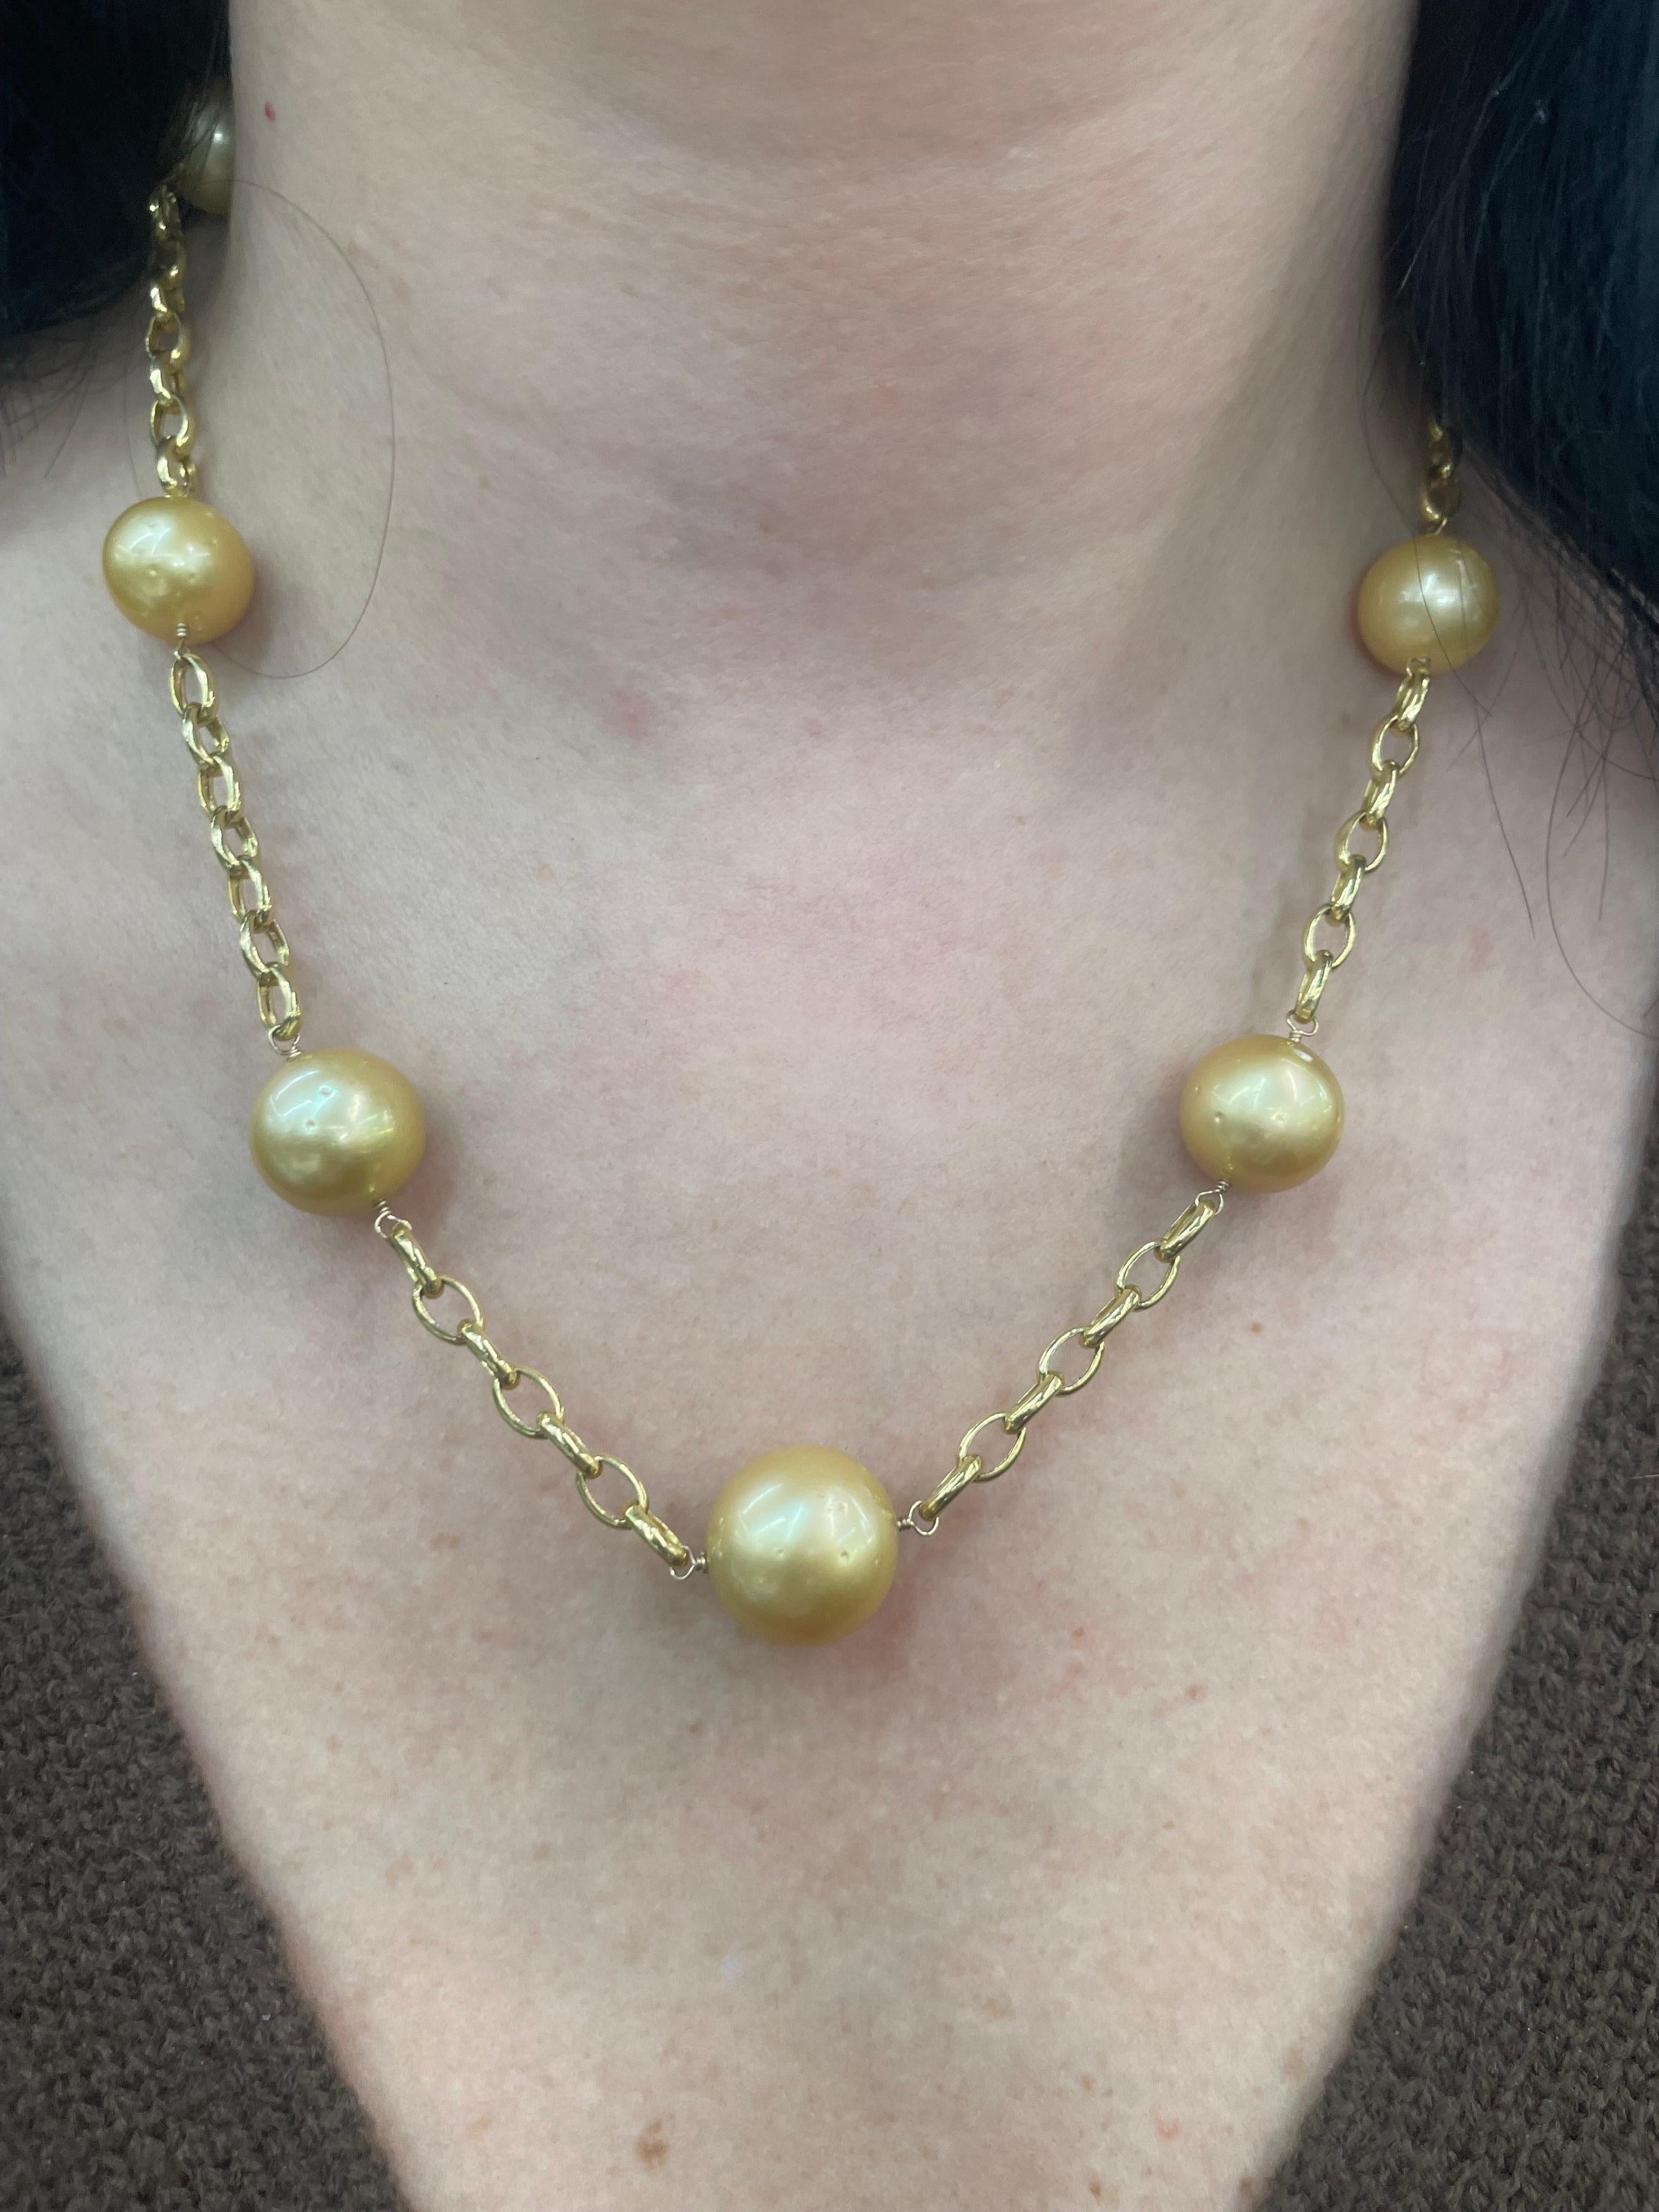 14 Karat Yellow gold necklace featuring 7 Golden South Sea Pearls measuring 12-15 MM on a oval link chain. 
Can customize in White, Pink or Tahitian Pearls.
Different Gold Colors may be available.
DM for more info and pricing. 